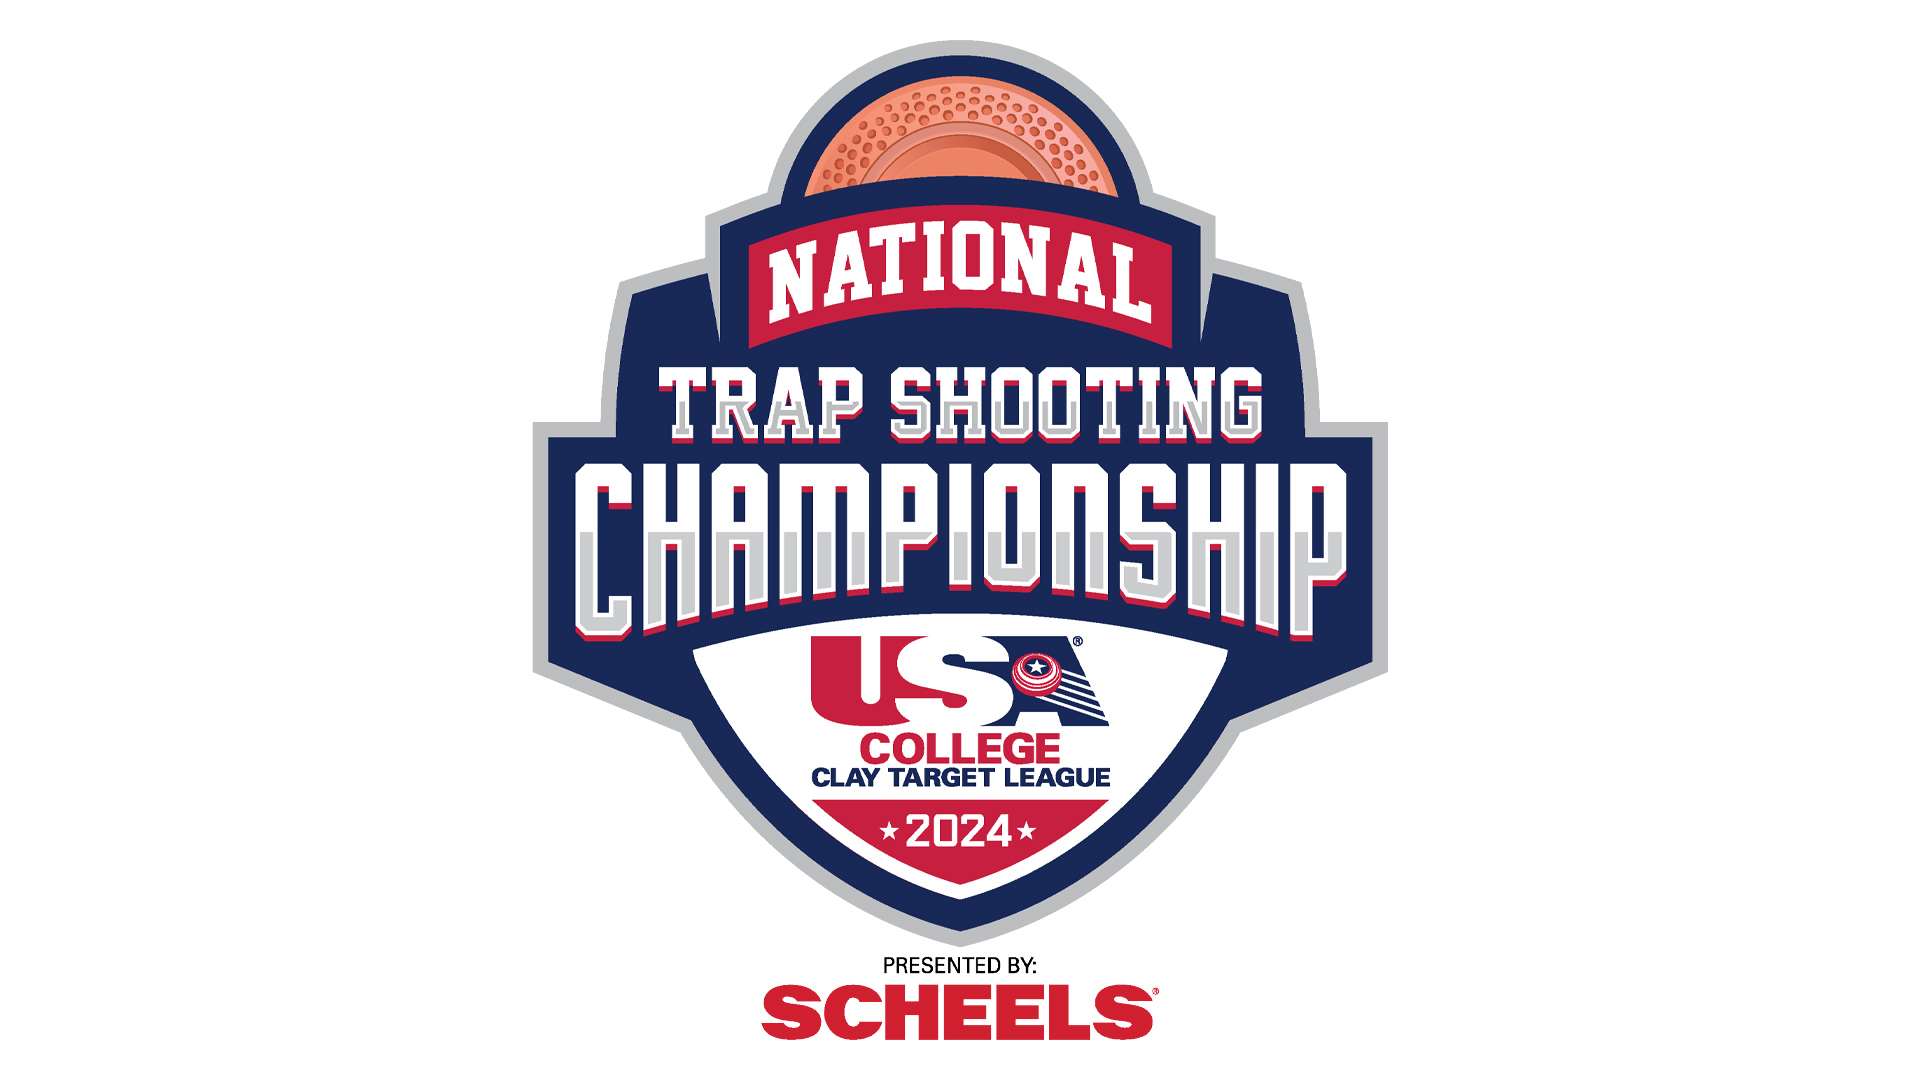 2024 USA College Clay Target League Trapshooting National Championship